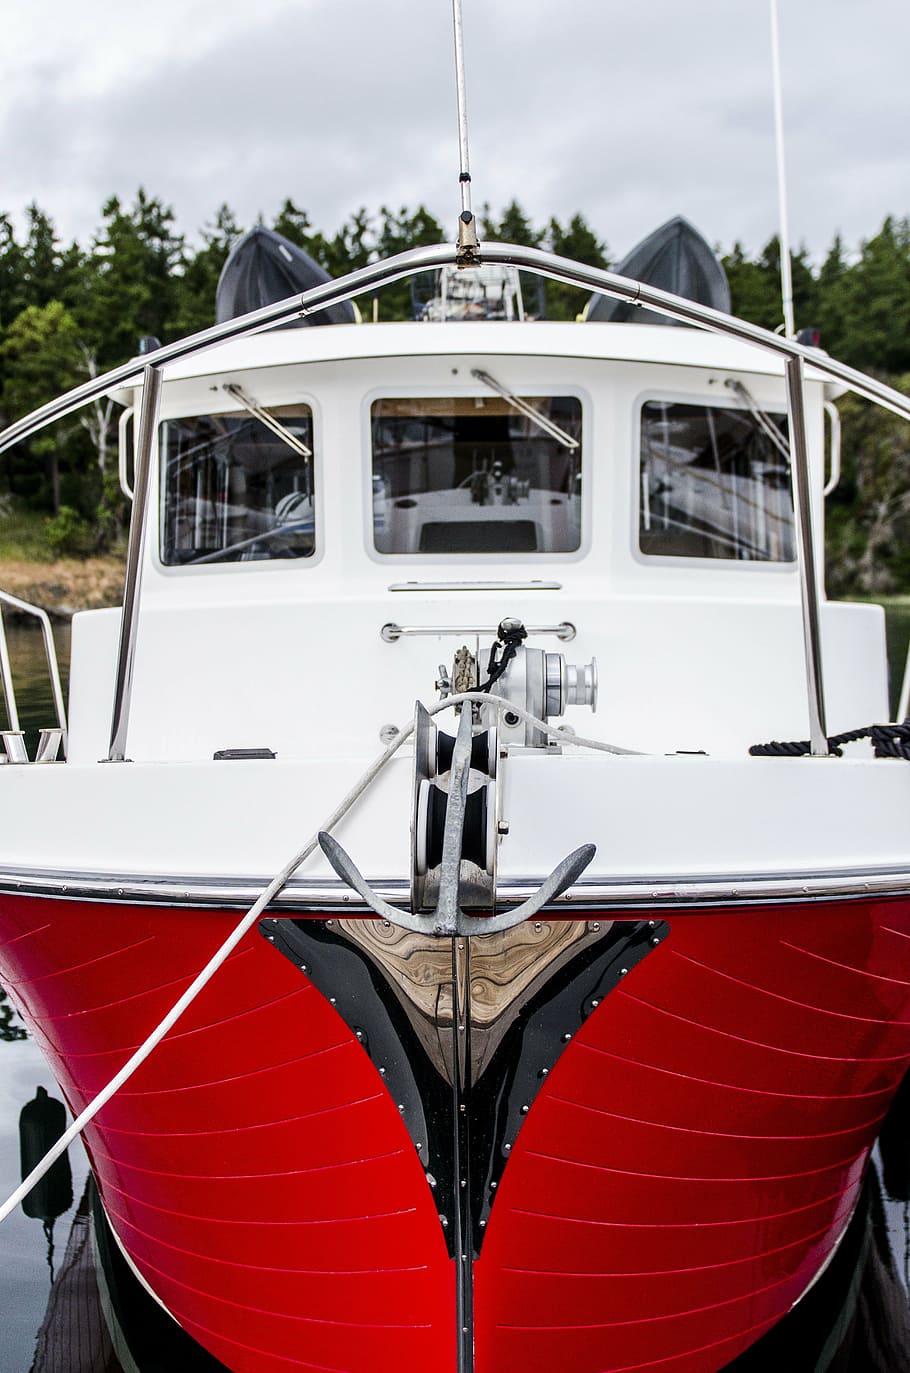 white, red, cabin cruiser, placed, shoreline, boat, yacht, travel, adventure, dock